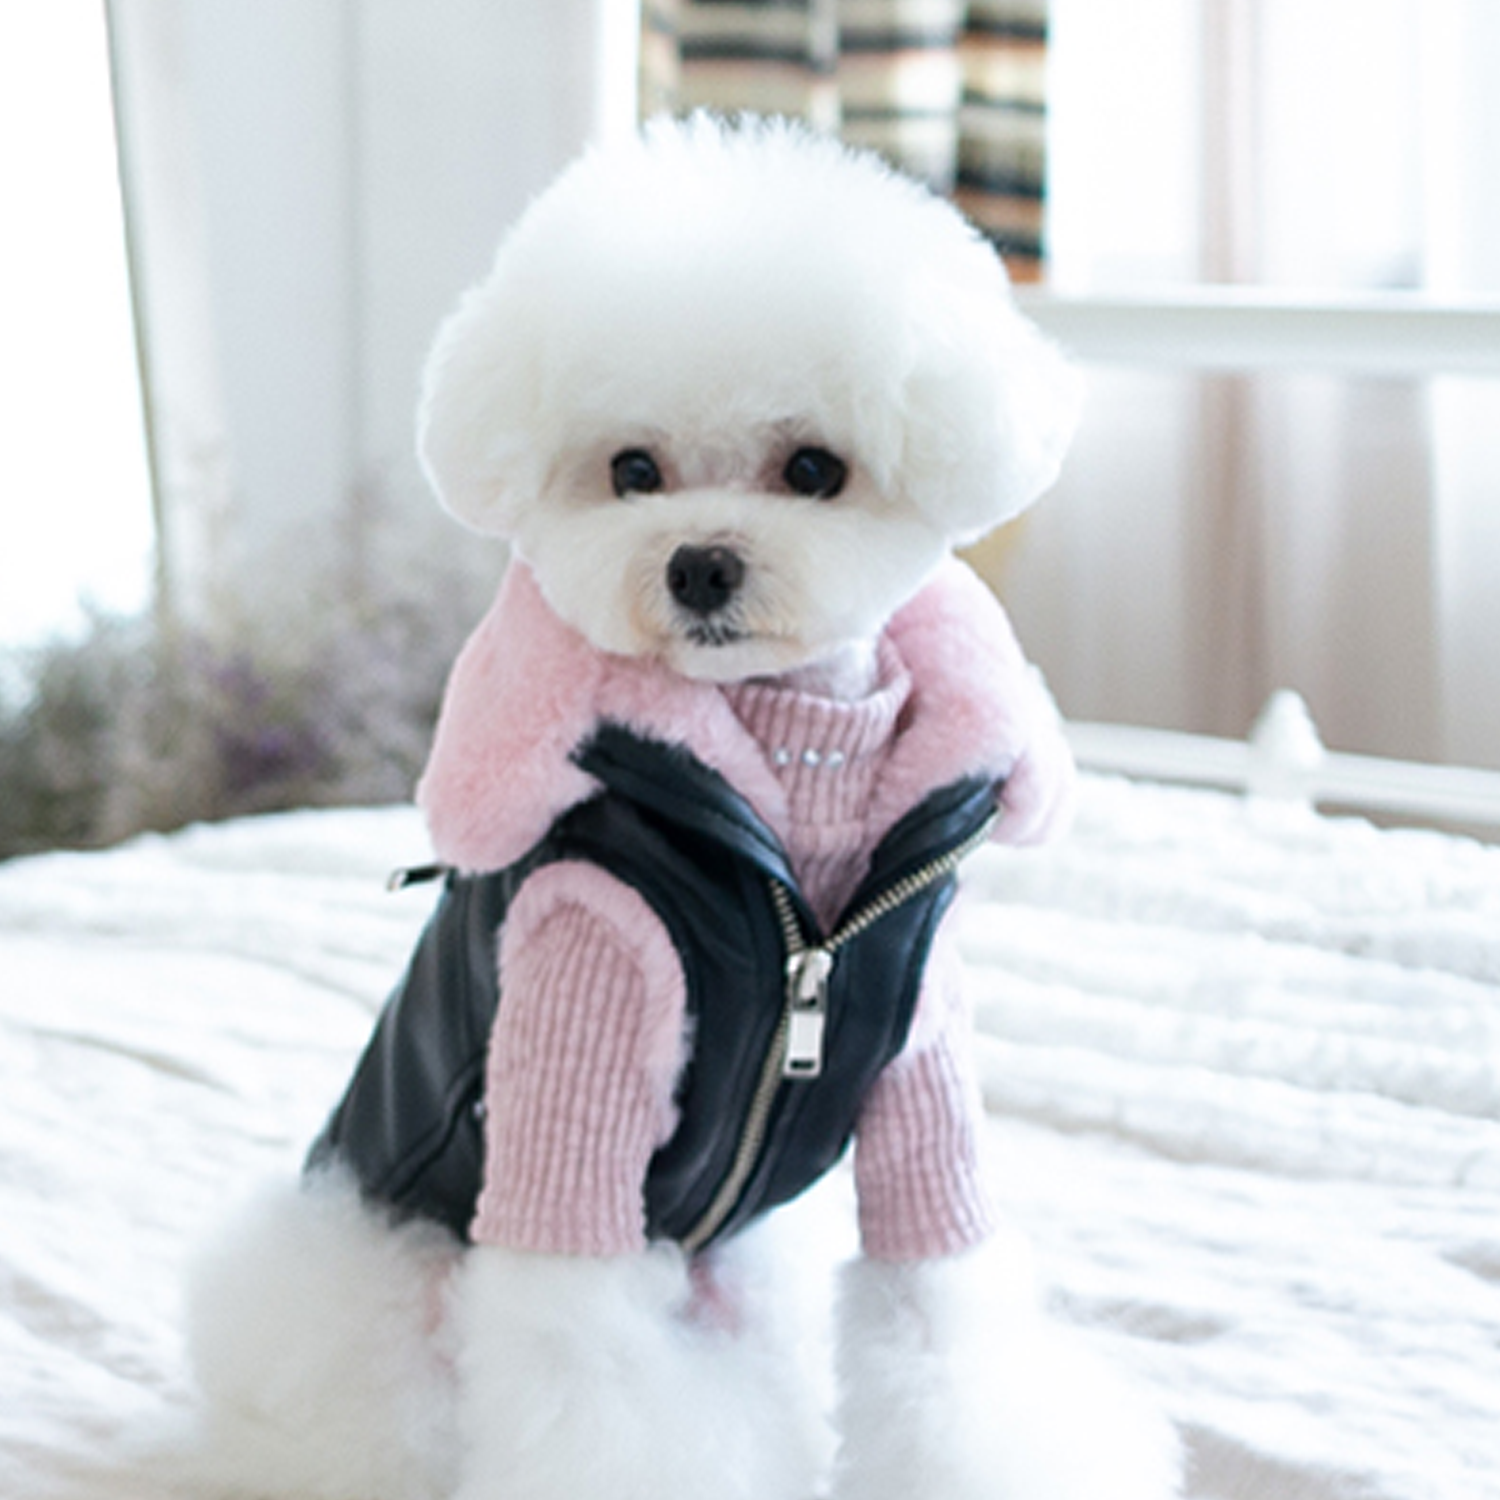 Designer Dog Clothes - Dog Clothing For Teacup Puppies and Small